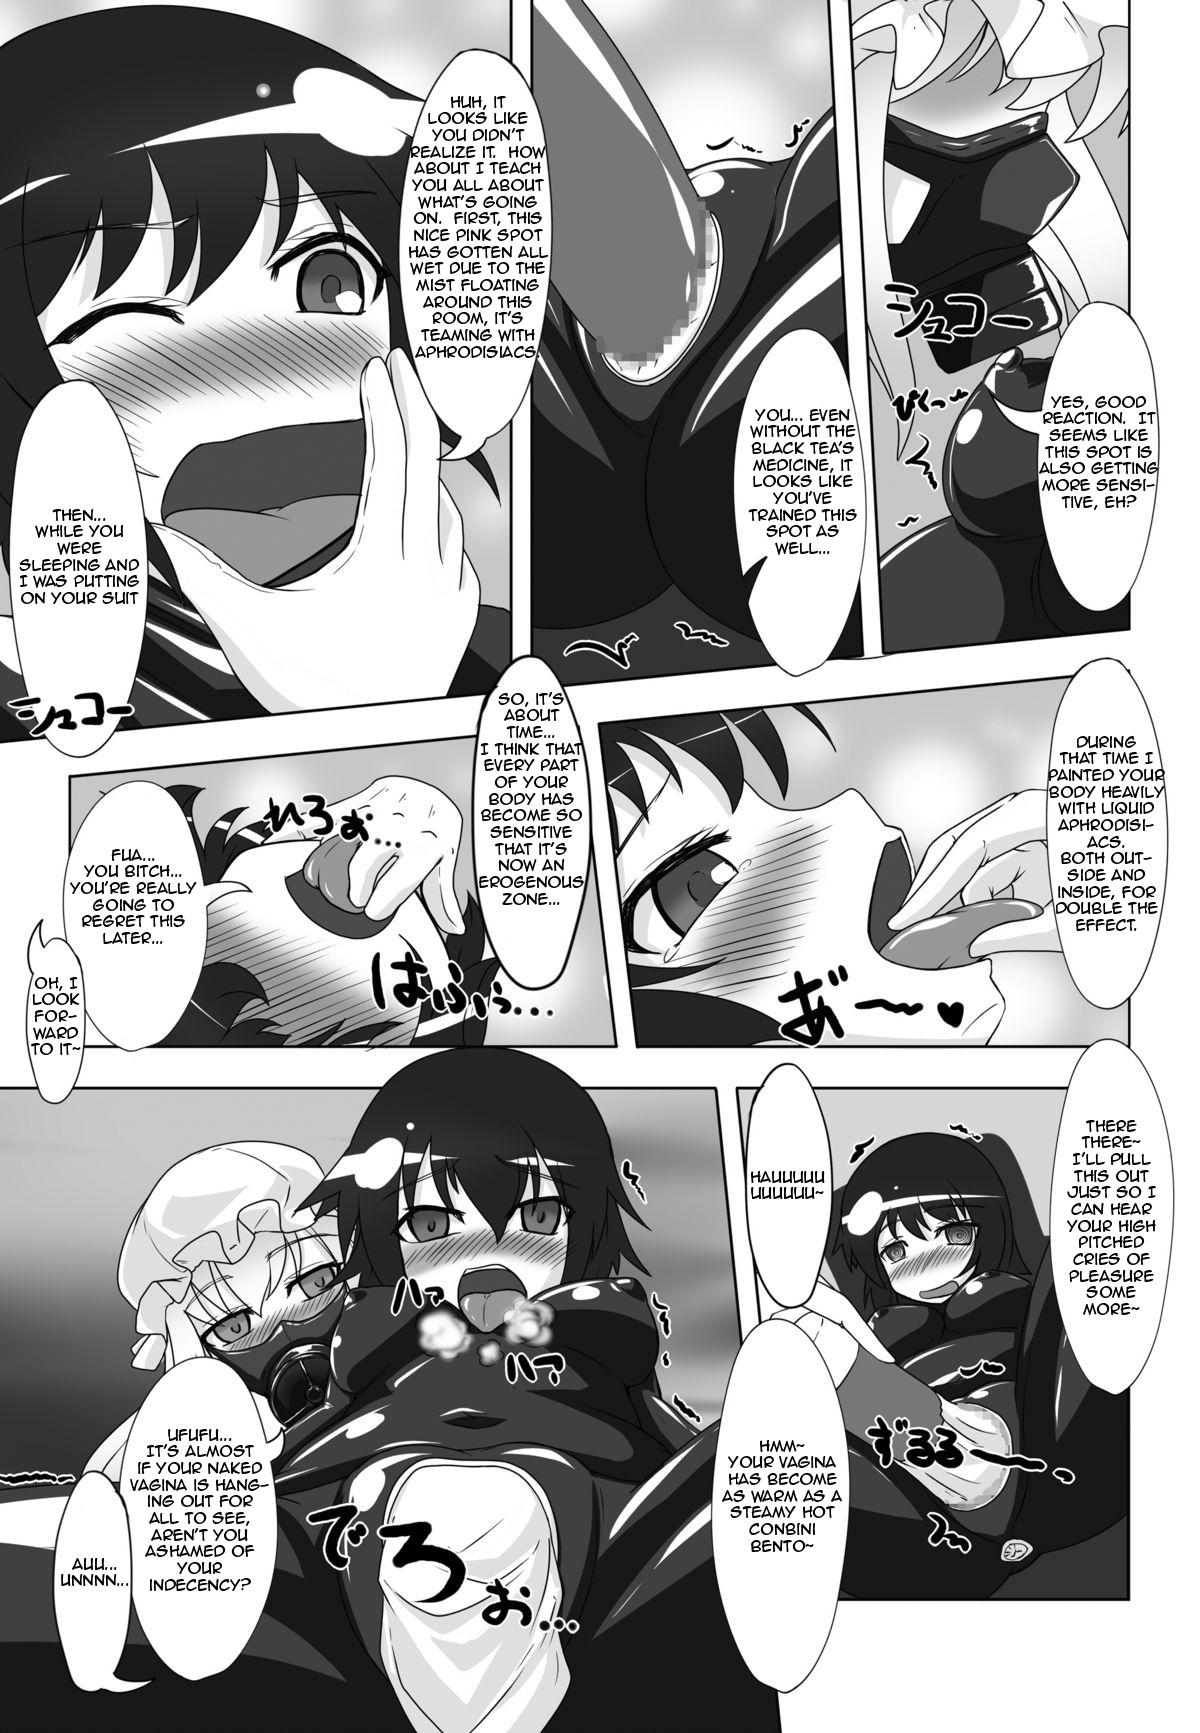 Spy Camera 2nd Skin Vol. 1 - Touhou project Tight Ass - Page 12